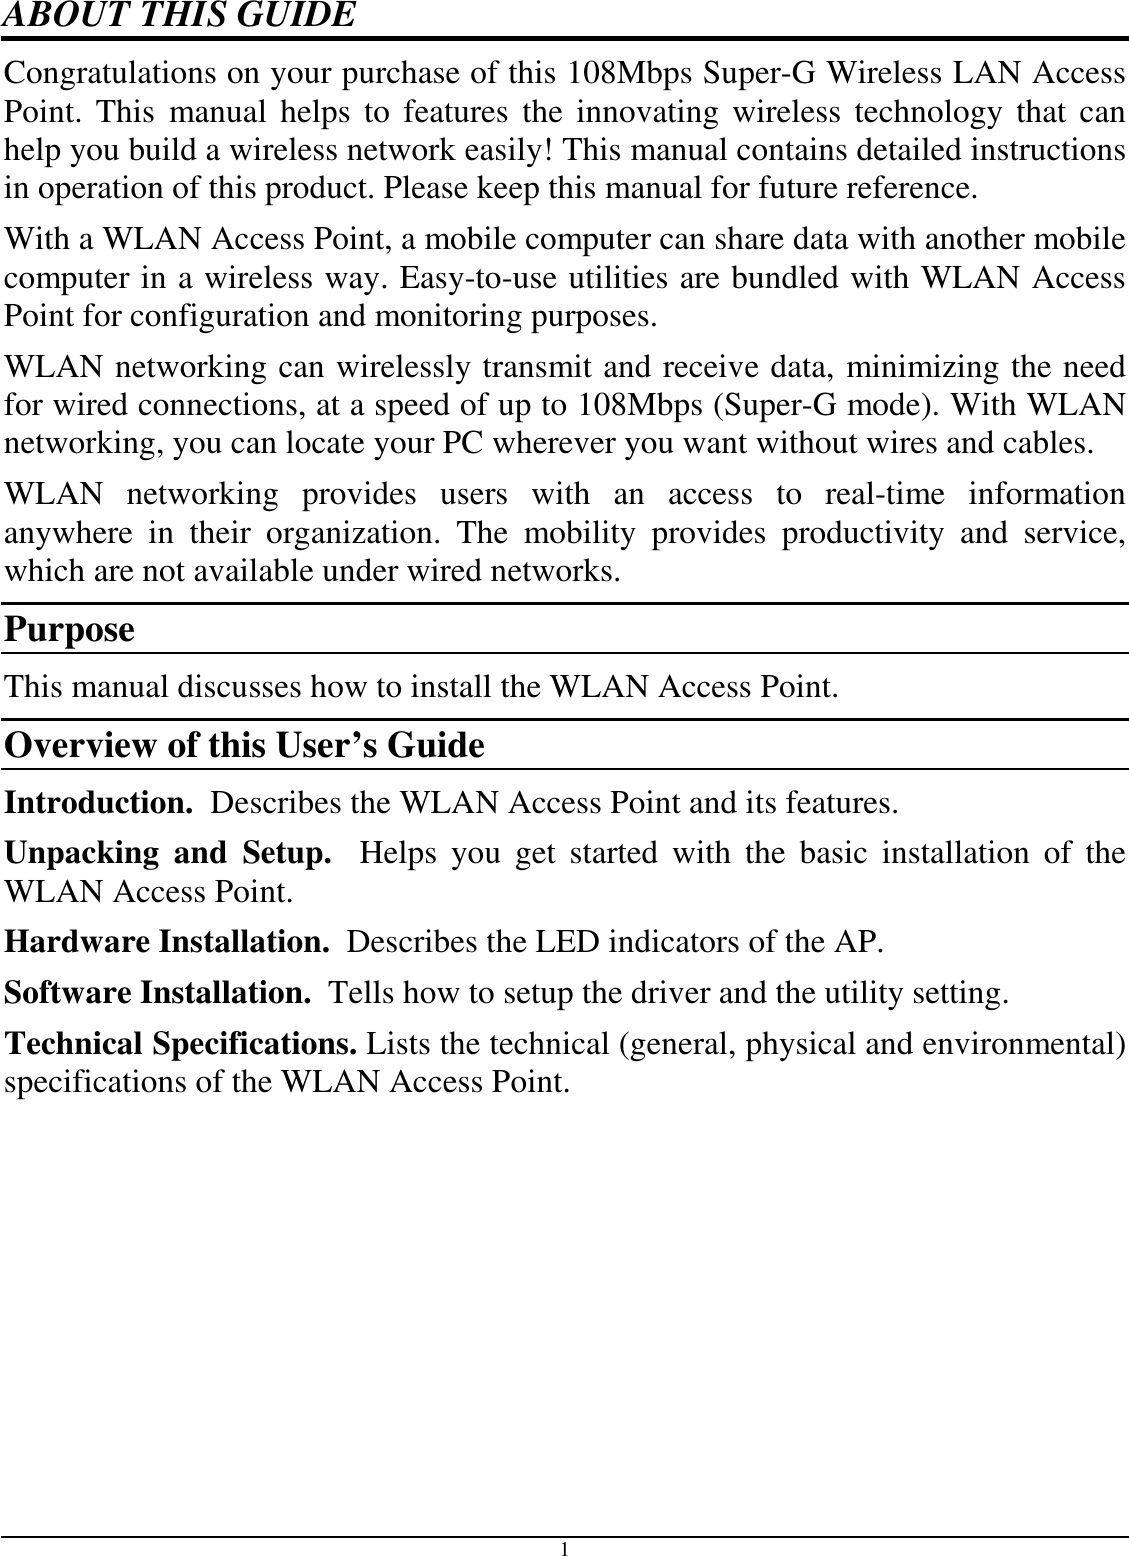 1 ABOUT THIS GUIDE Congratulations on your purchase of this 108Mbps Super-G Wireless LAN Access Point.  This  manual helps  to  features  the  innovating  wireless  technology  that  can help you build a wireless network easily! This manual contains detailed instructions in operation of this product. Please keep this manual for future reference. With a WLAN Access Point, a mobile computer can share data with another mobile computer in a wireless way. Easy-to-use utilities are bundled with WLAN Access Point for configuration and monitoring purposes.  WLAN networking can wirelessly transmit and receive data, minimizing the need for wired connections, at a speed of up to 108Mbps (Super-G mode). With WLAN networking, you can locate your PC wherever you want without wires and cables. WLAN  networking  provides  users  with  an  access  to  real-time  information anywhere  in  their  organization.  The  mobility  provides  productivity  and  service, which are not available under wired networks.  Purpose This manual discusses how to install the WLAN Access Point.  Overview of this User’s Guide Introduction.  Describes the WLAN Access Point and its features. Unpacking  and  Setup.    Helps  you  get  started  with  the  basic  installation  of  the WLAN Access Point. Hardware Installation.  Describes the LED indicators of the AP. Software Installation.  Tells how to setup the driver and the utility setting. Technical Specifications. Lists the technical (general, physical and environmental) specifications of the WLAN Access Point. 